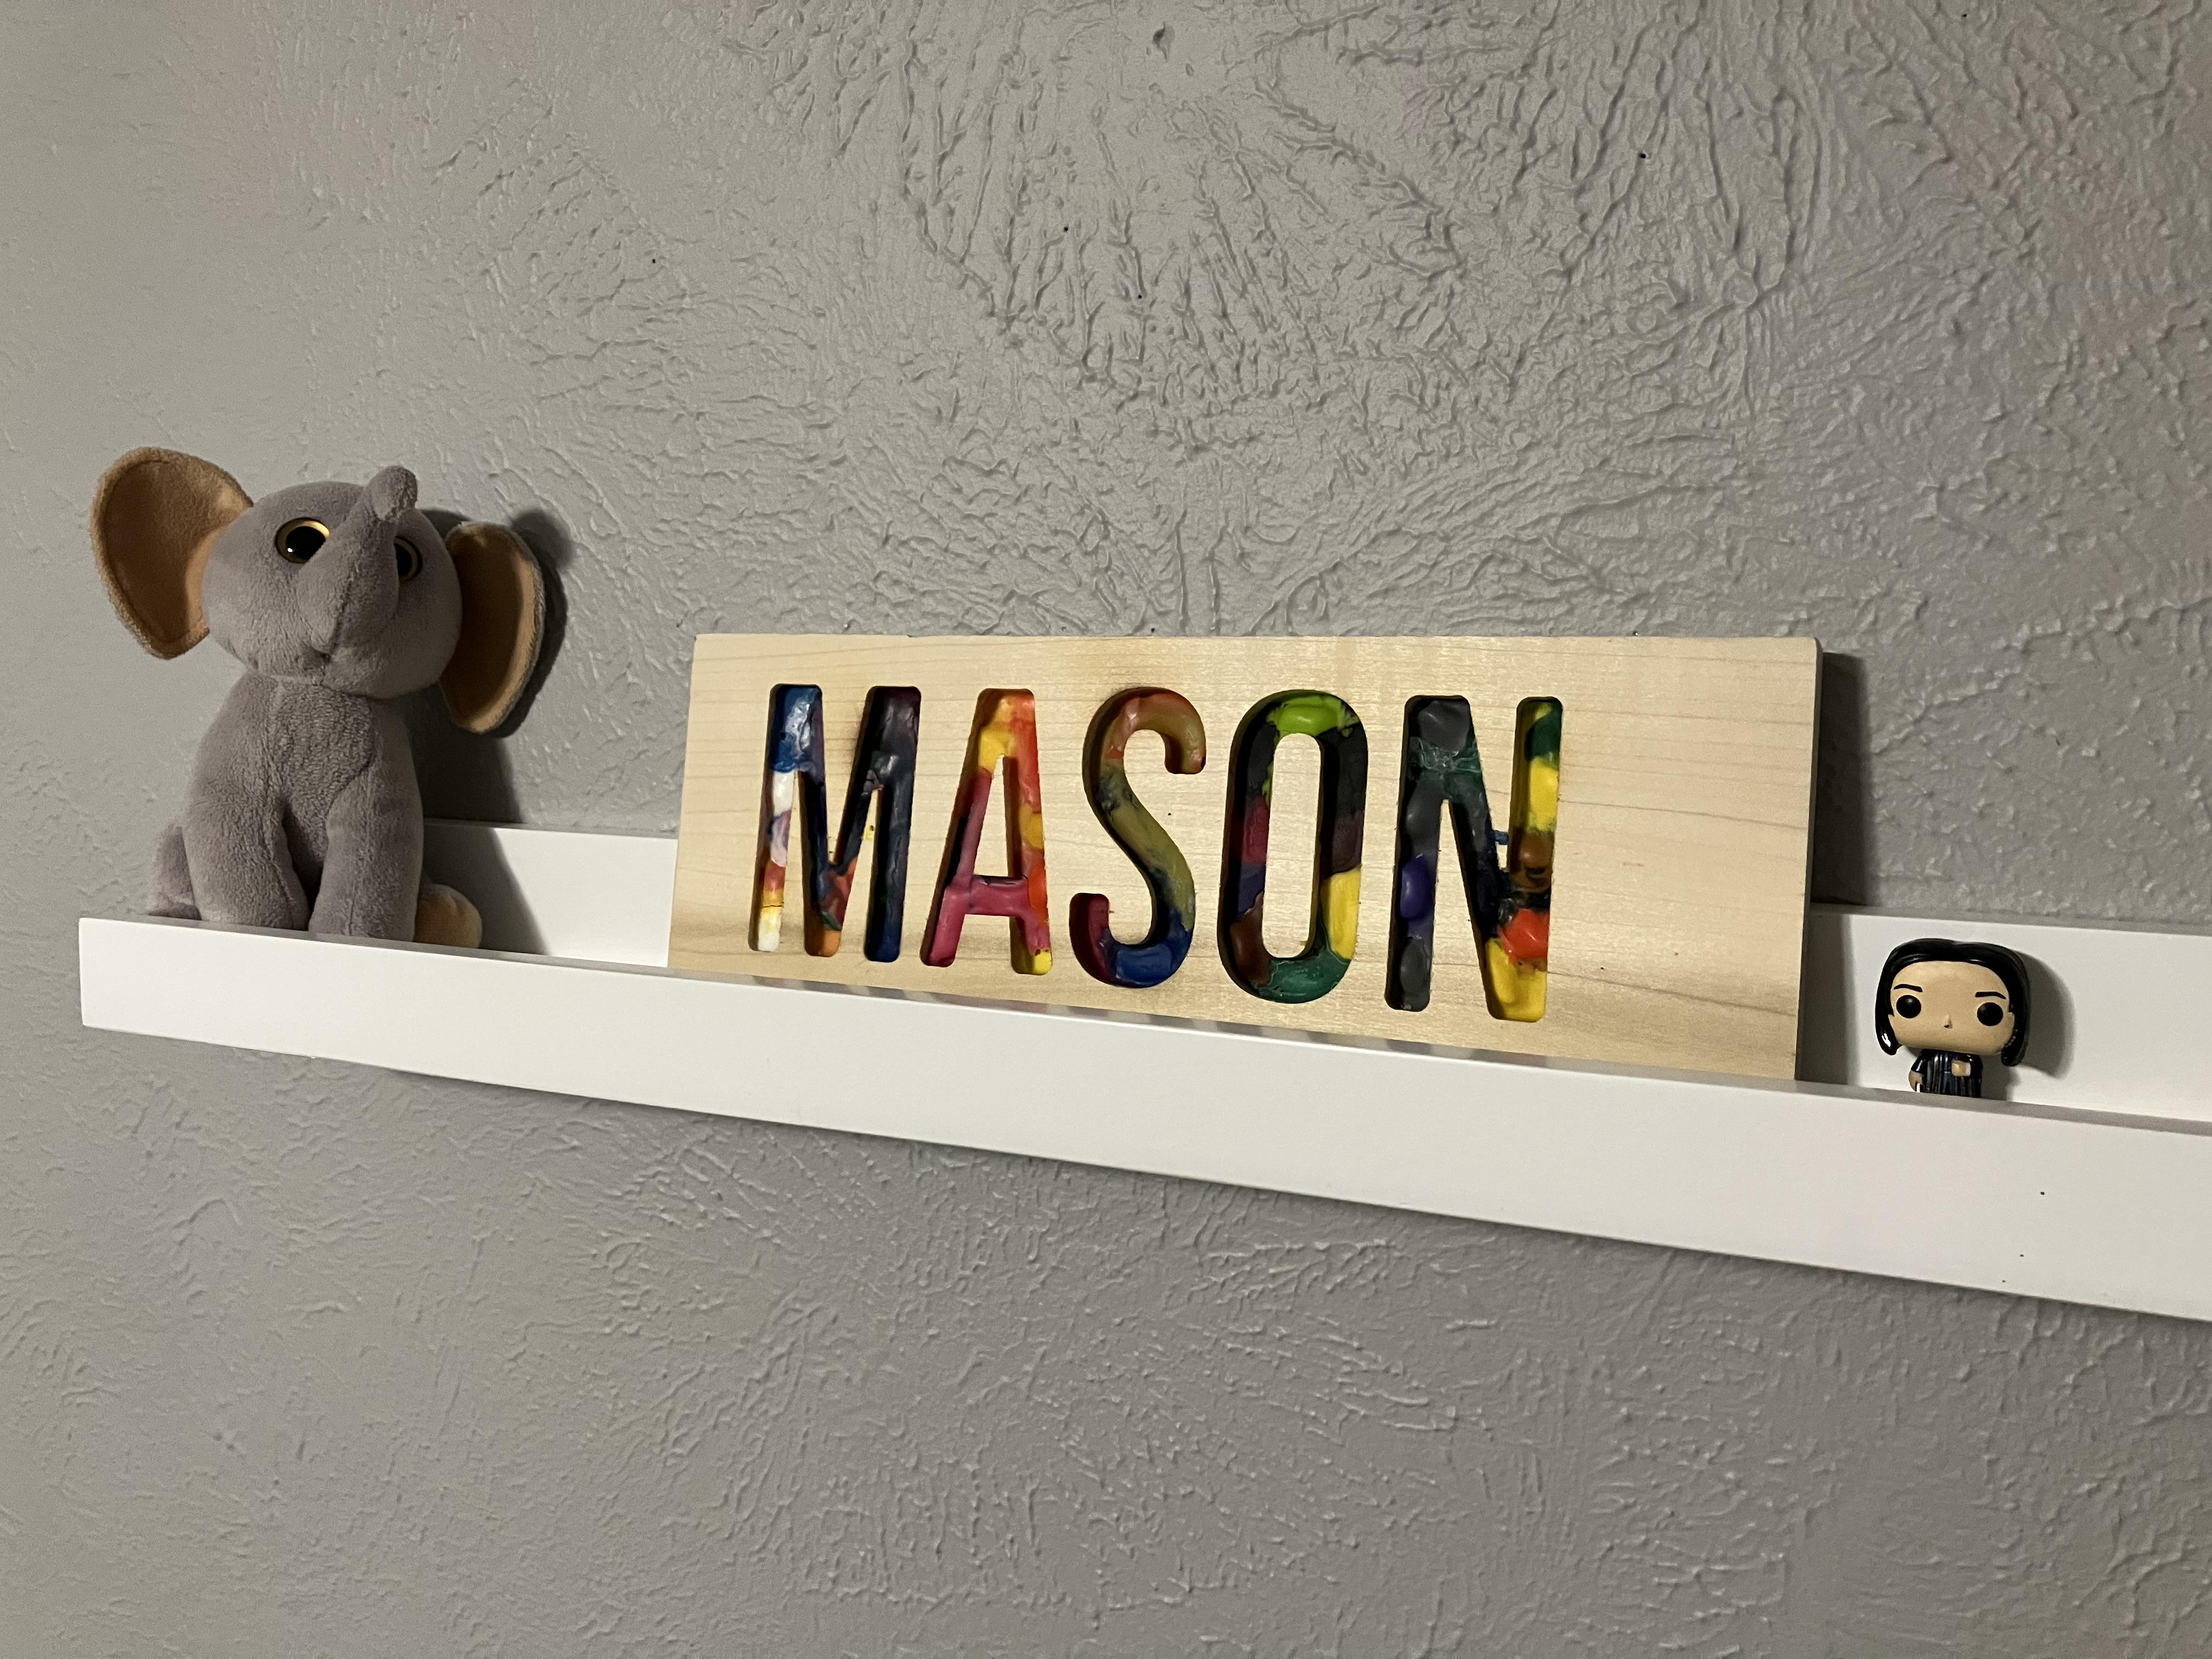 Melted Crayon Name Plate